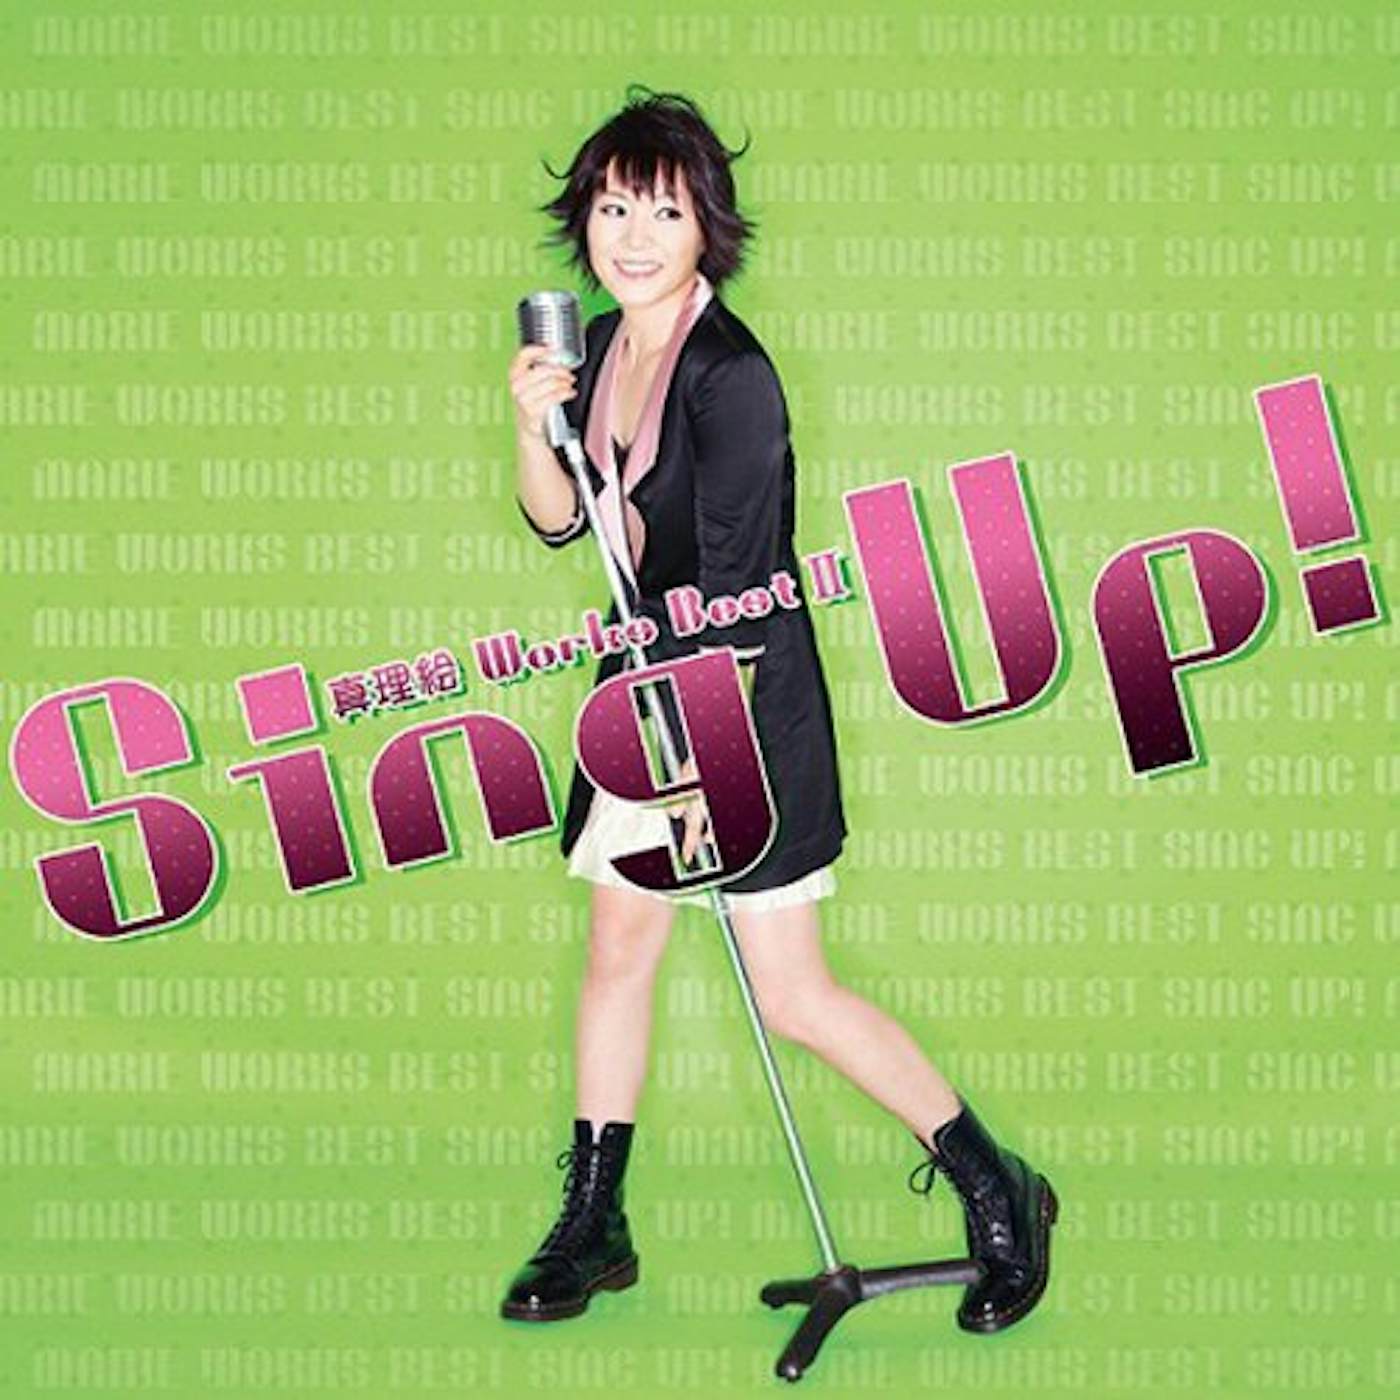 Marie SING UP CD